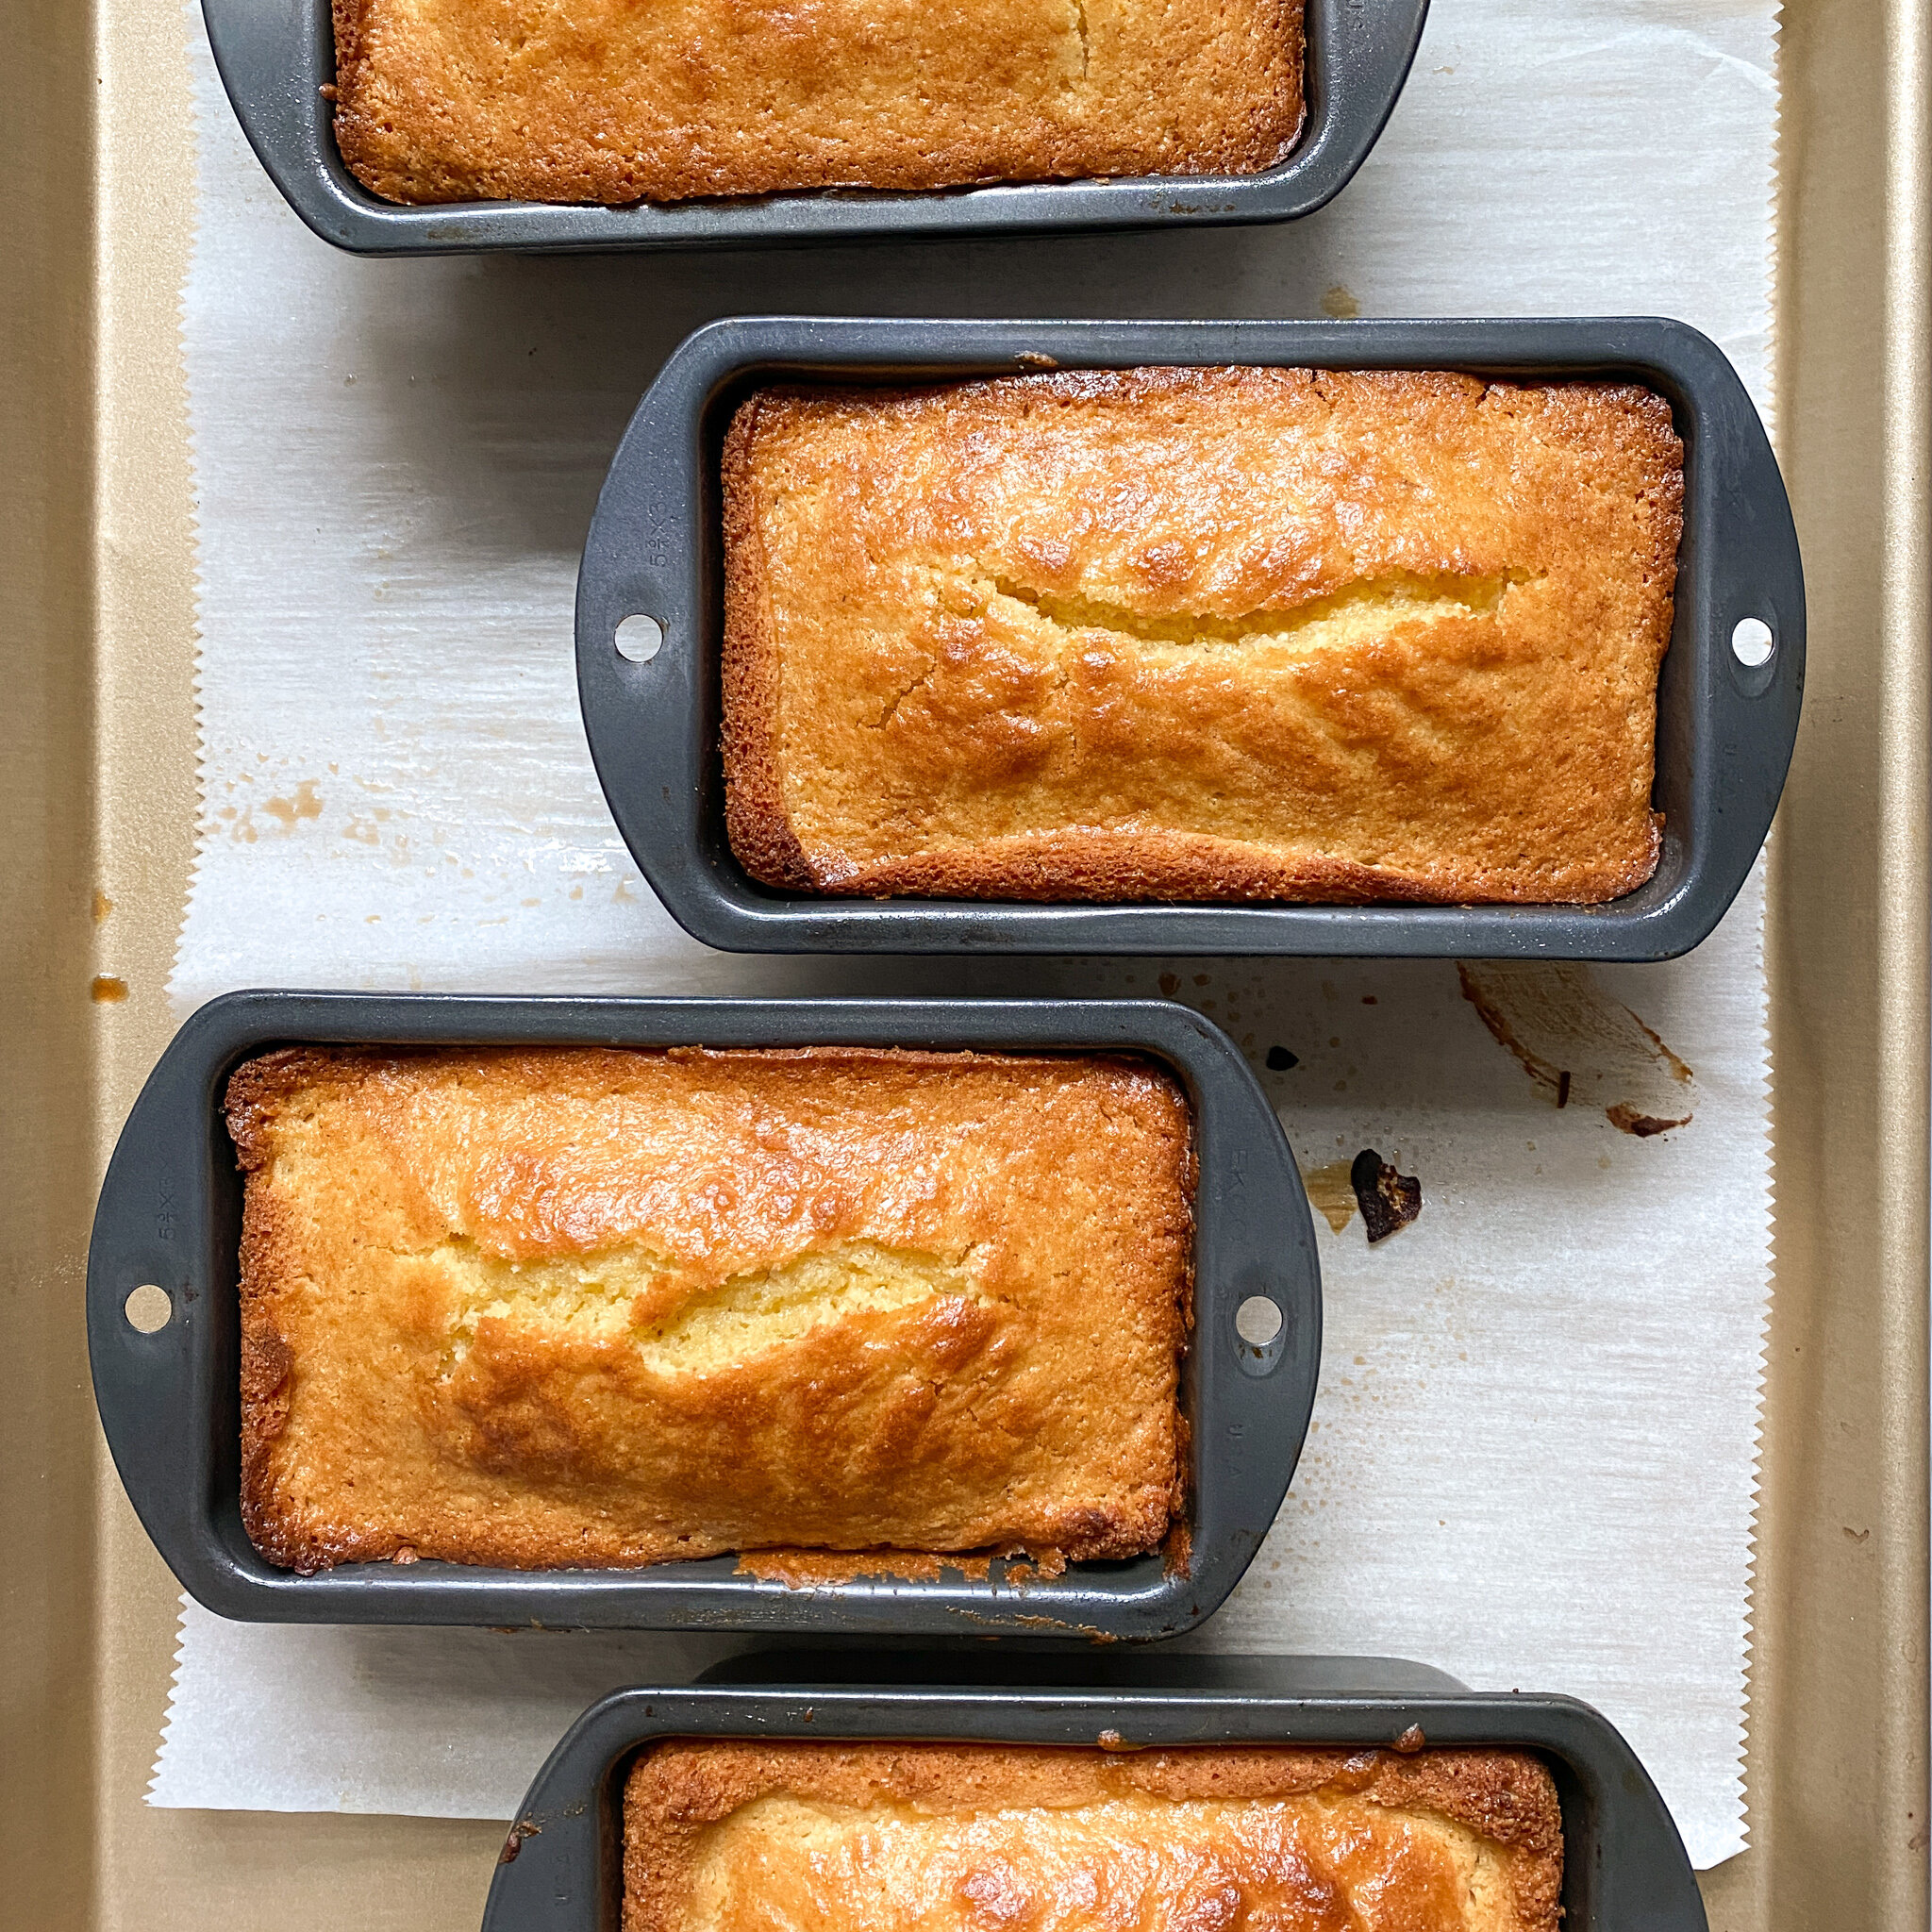 How Long Should You Bake Your Mini-Loaves? - The Prepared Pantry Blog